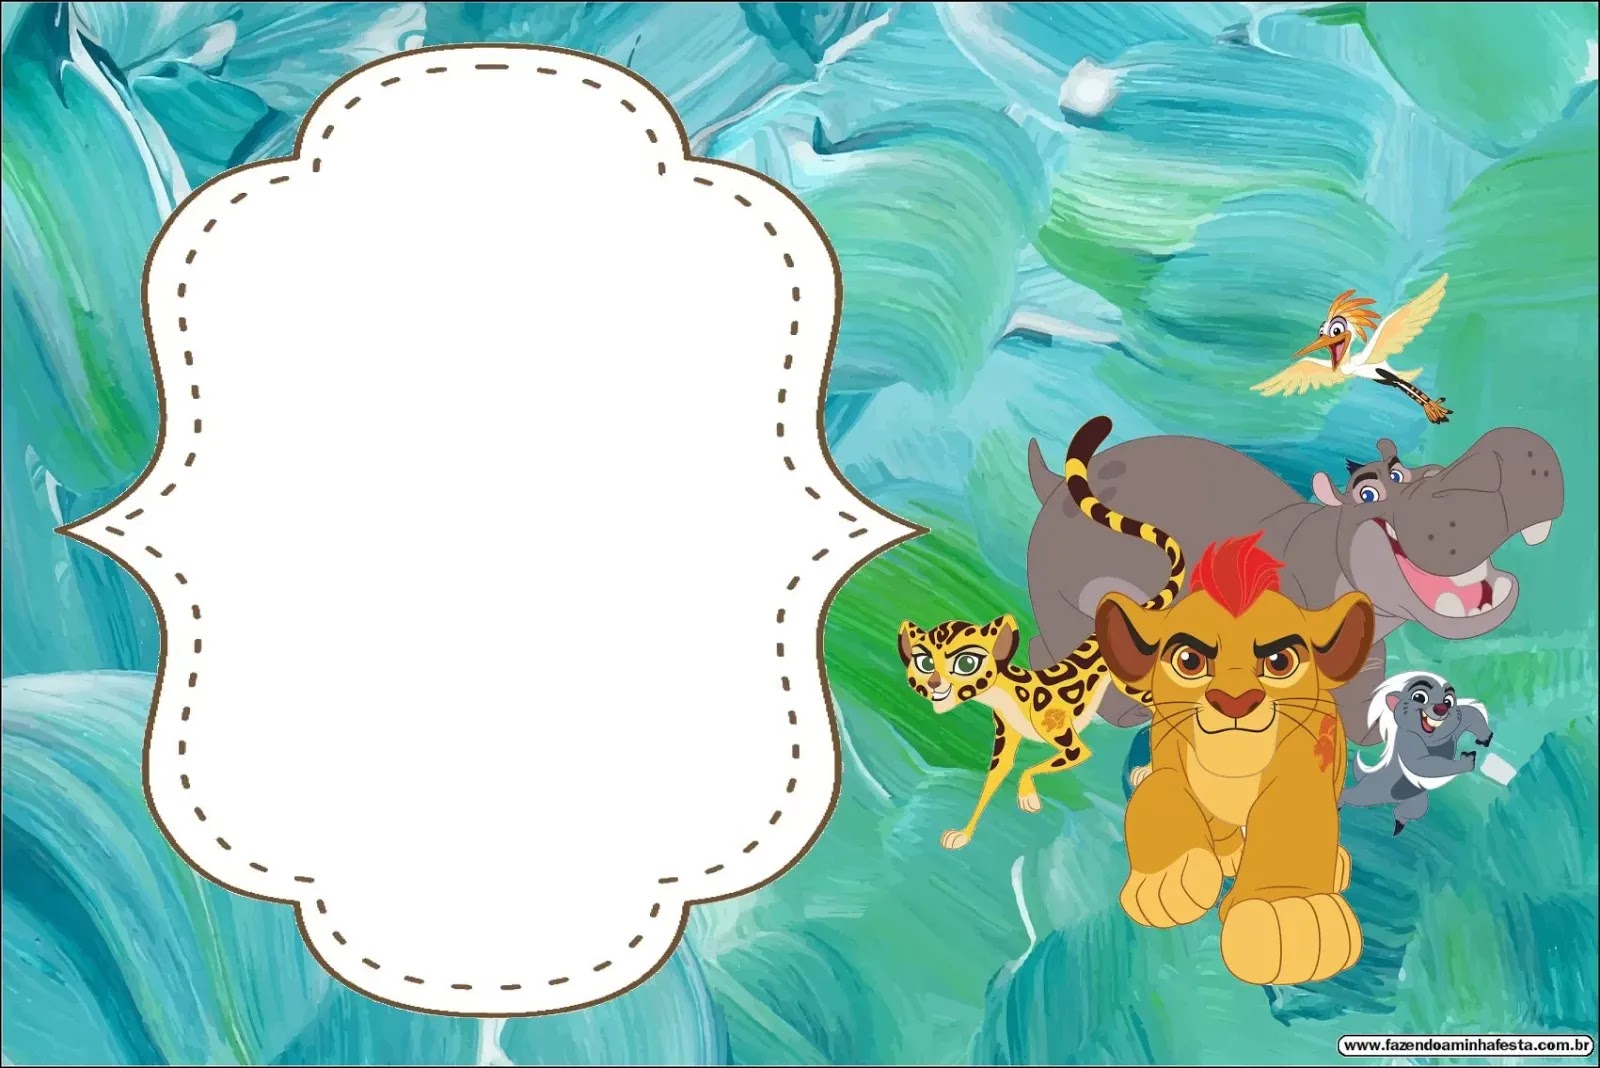 the-lion-guard-free-printable-invitations-oh-my-fiesta-in-english